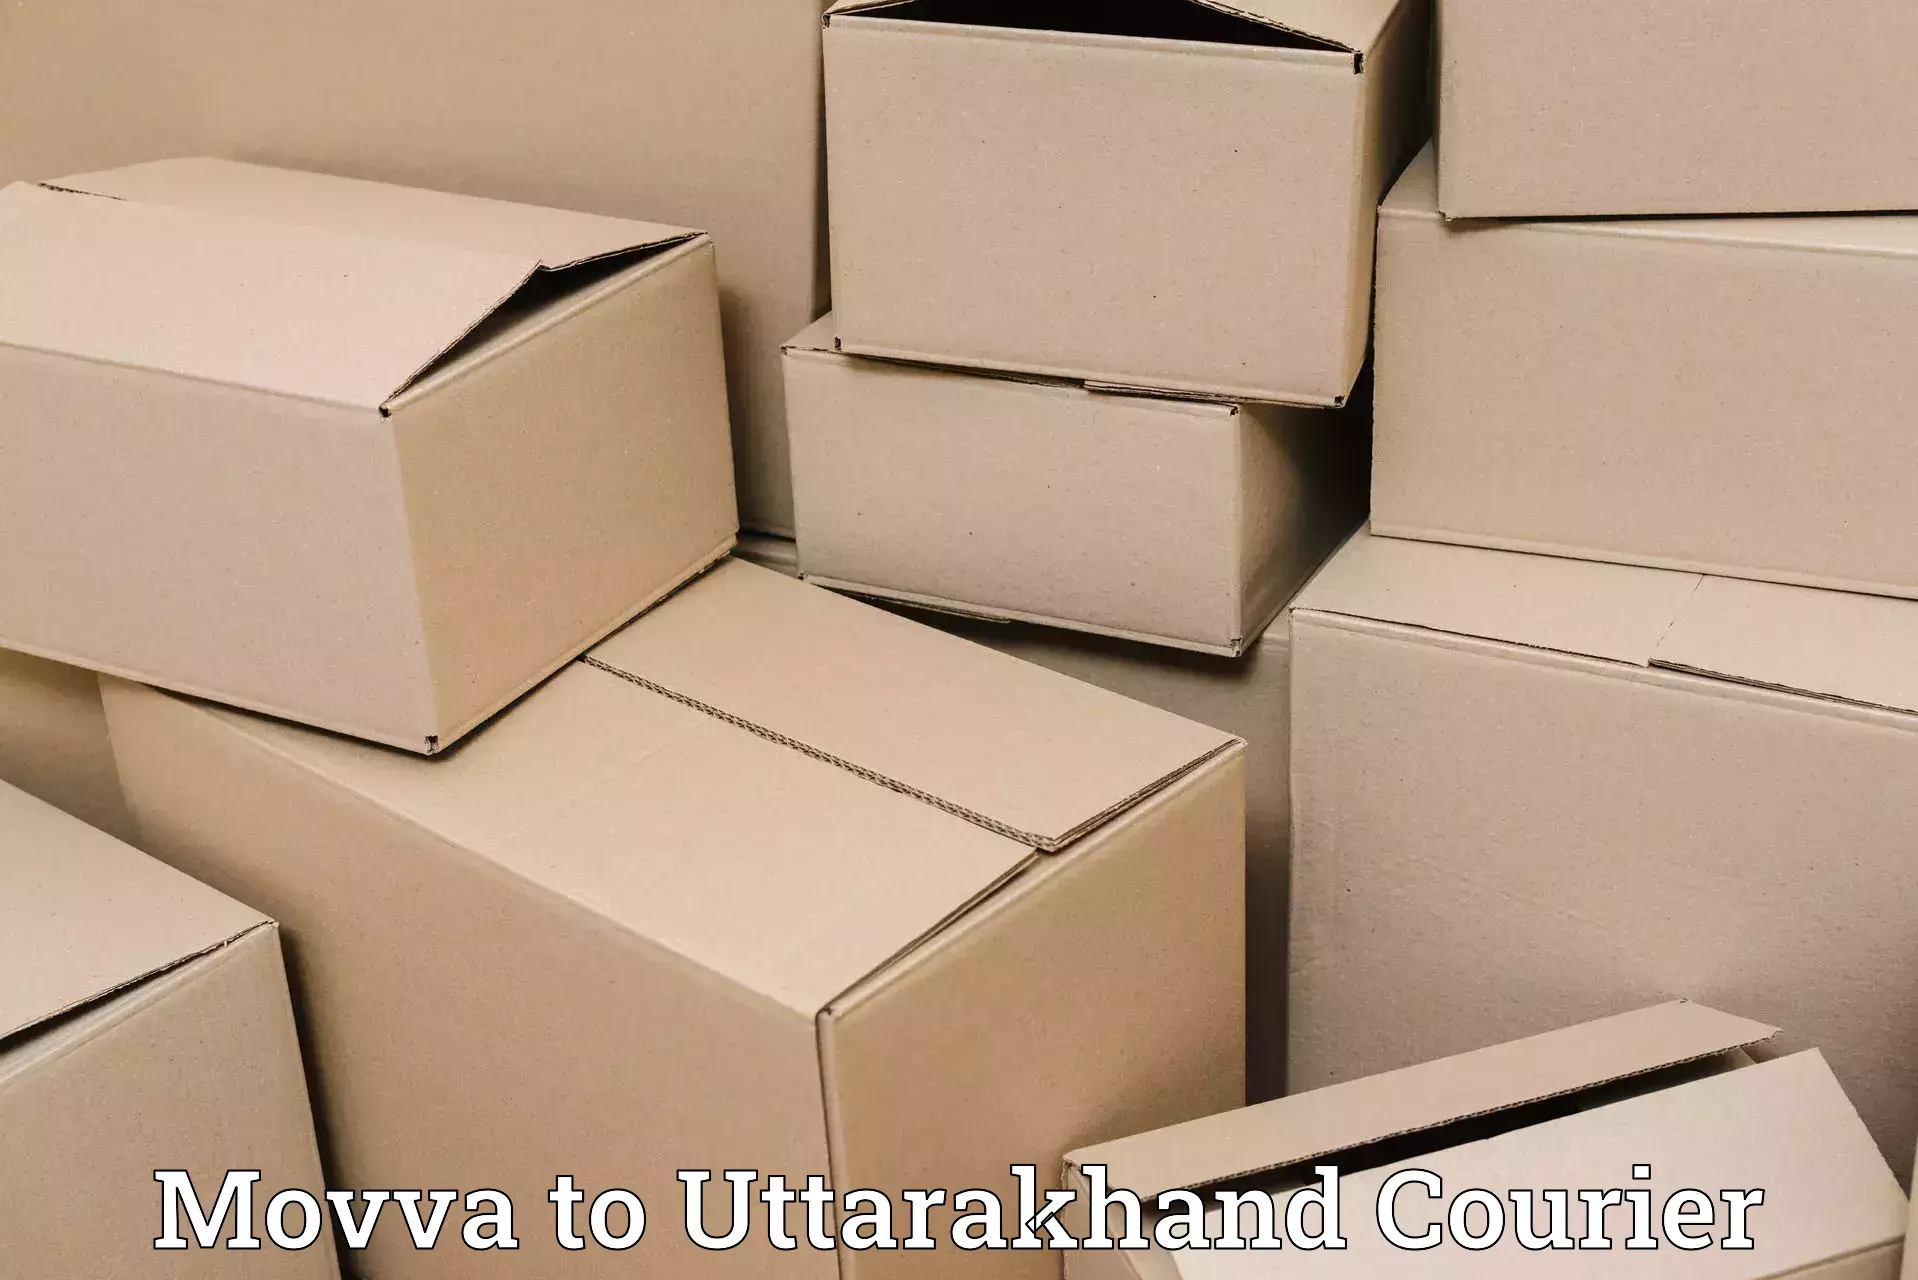 Online shipping calculator Movva to IIT Roorkee